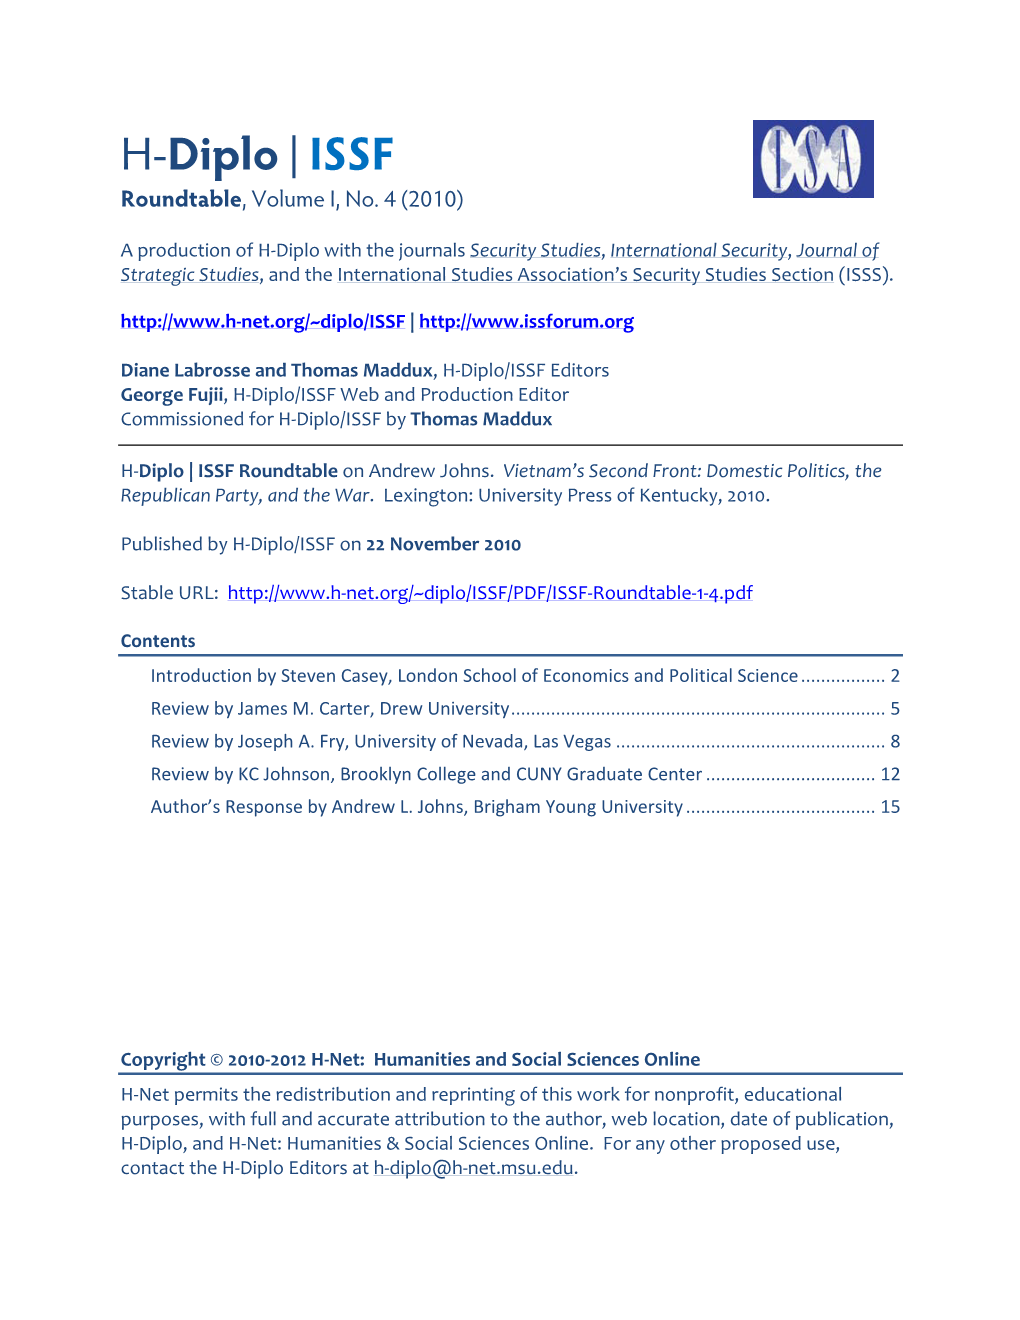 H-Diplo/ISSF Roundtable, Vol. 1, No. 4 (2010)